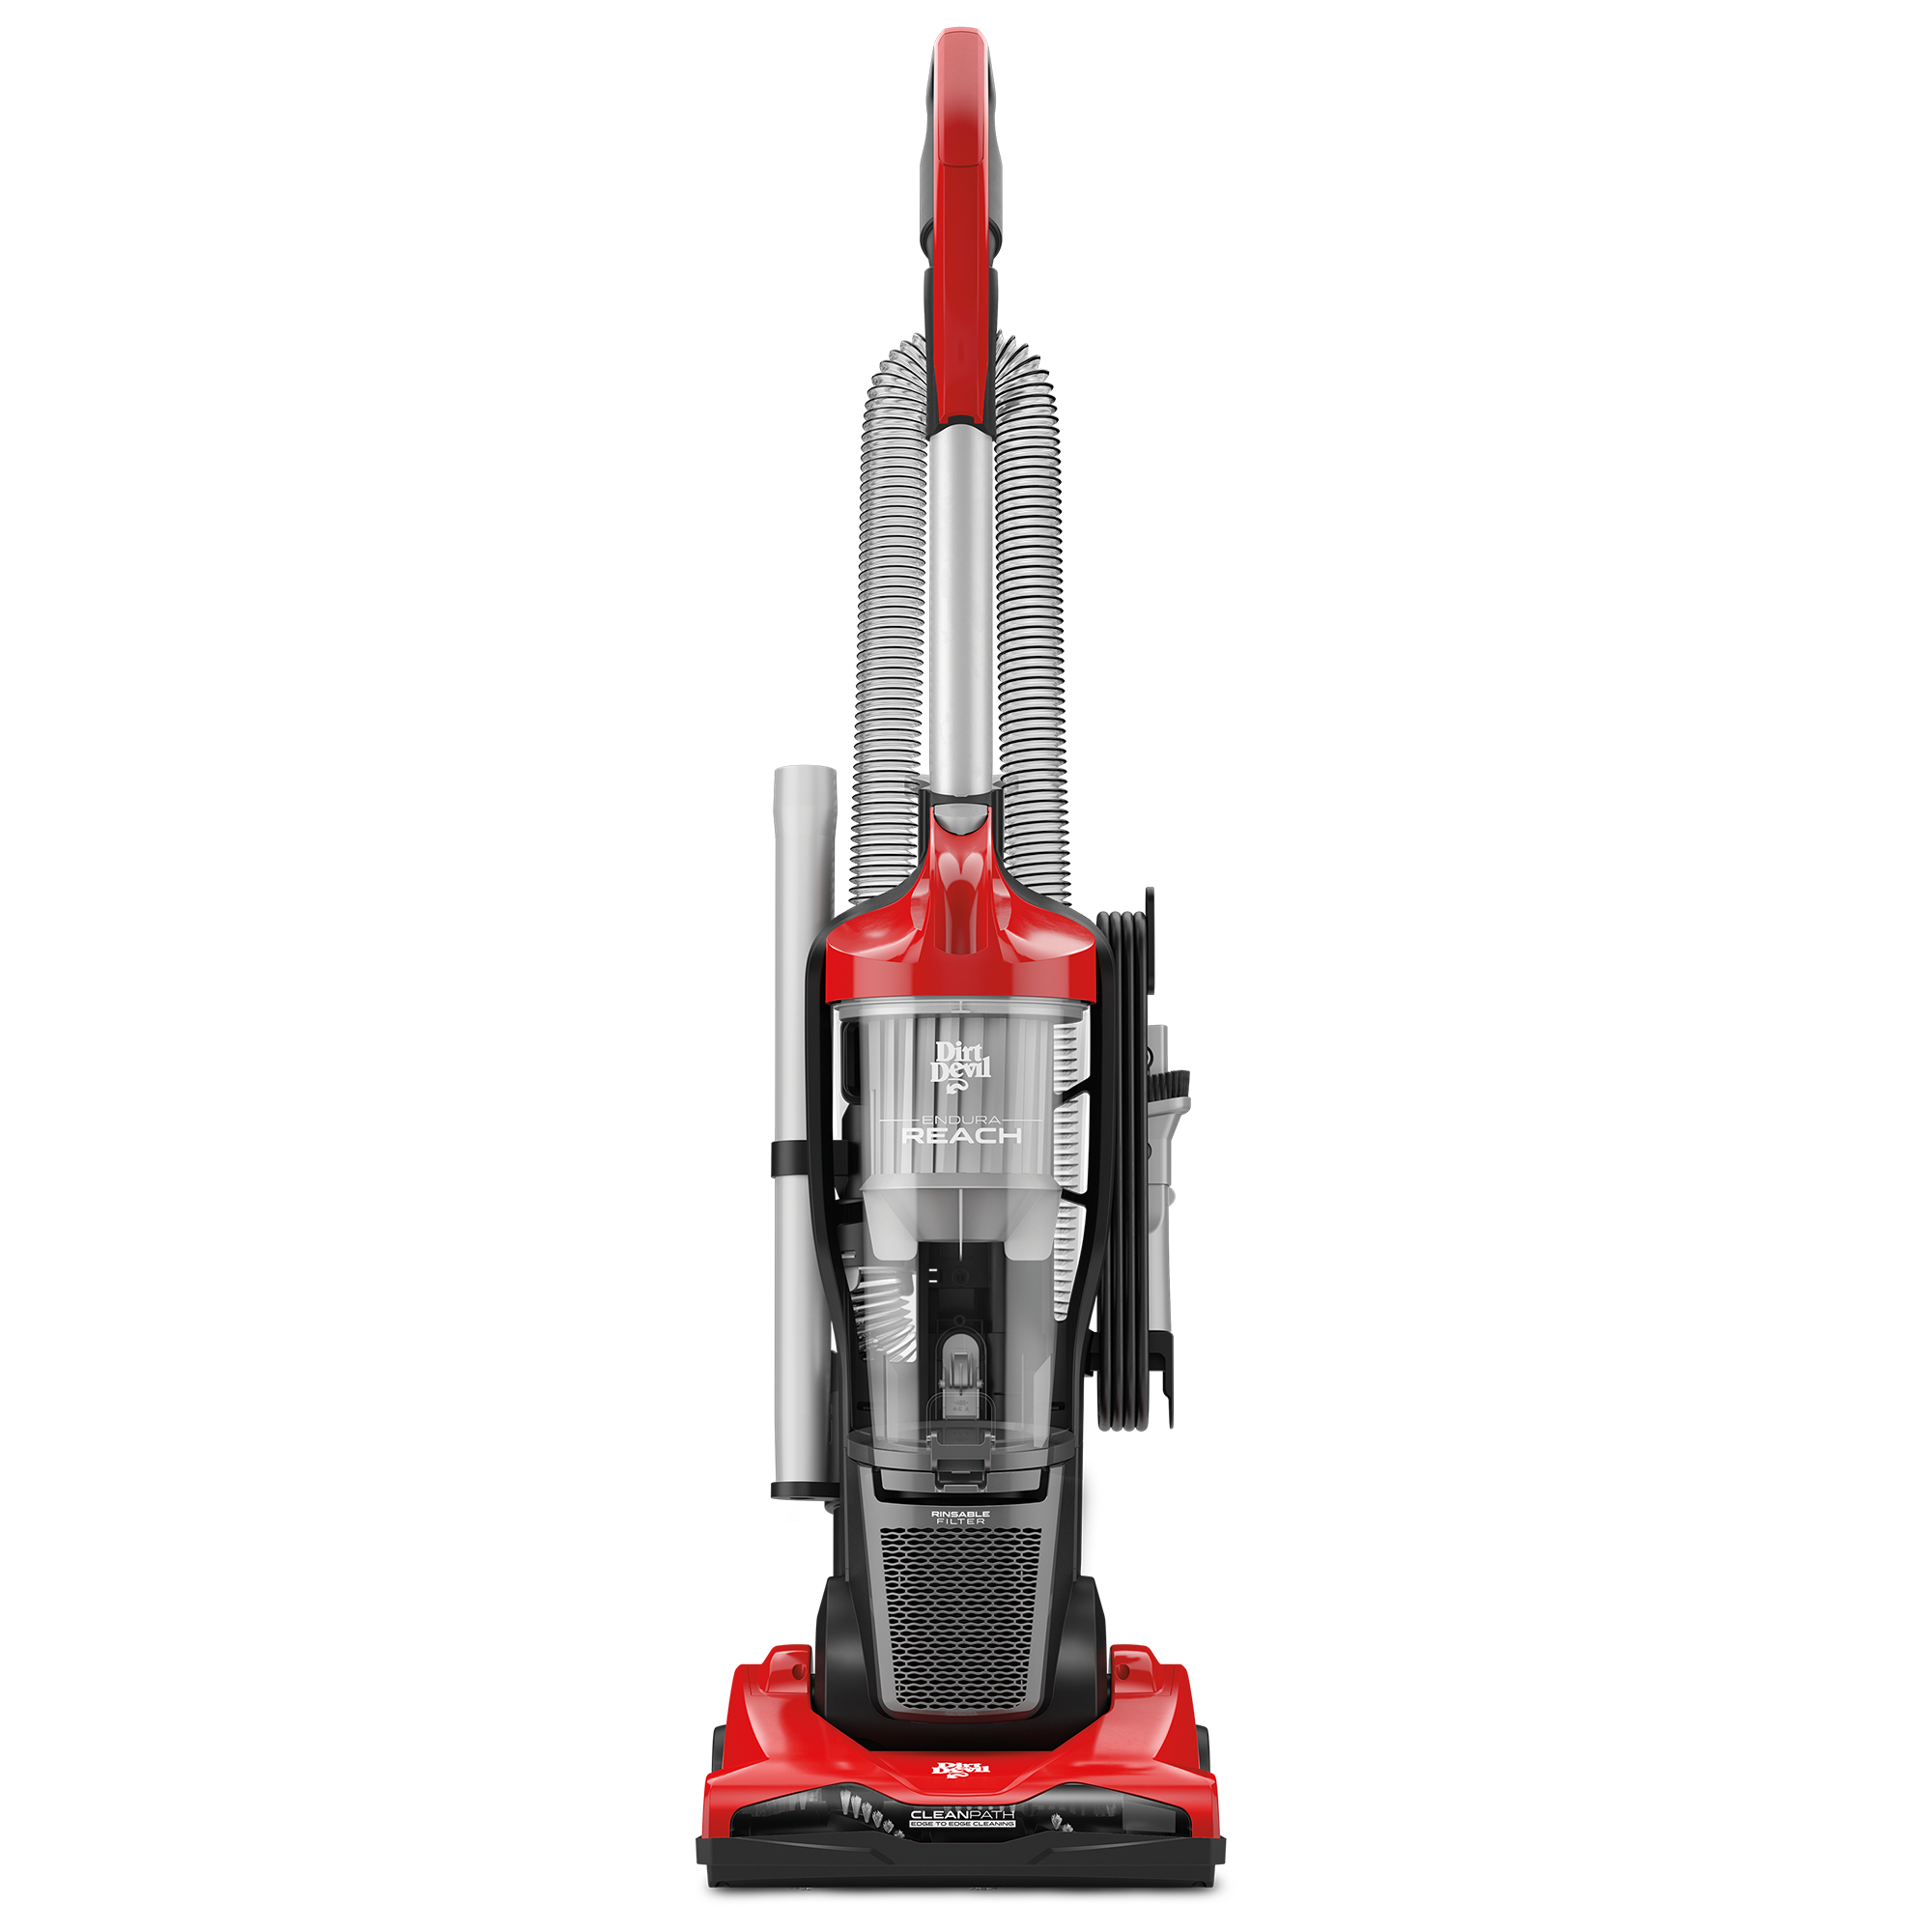 Dirt Devil Endura Reach Compact Upright Vacuum Cleaner, UD20124 - image 1 of 11